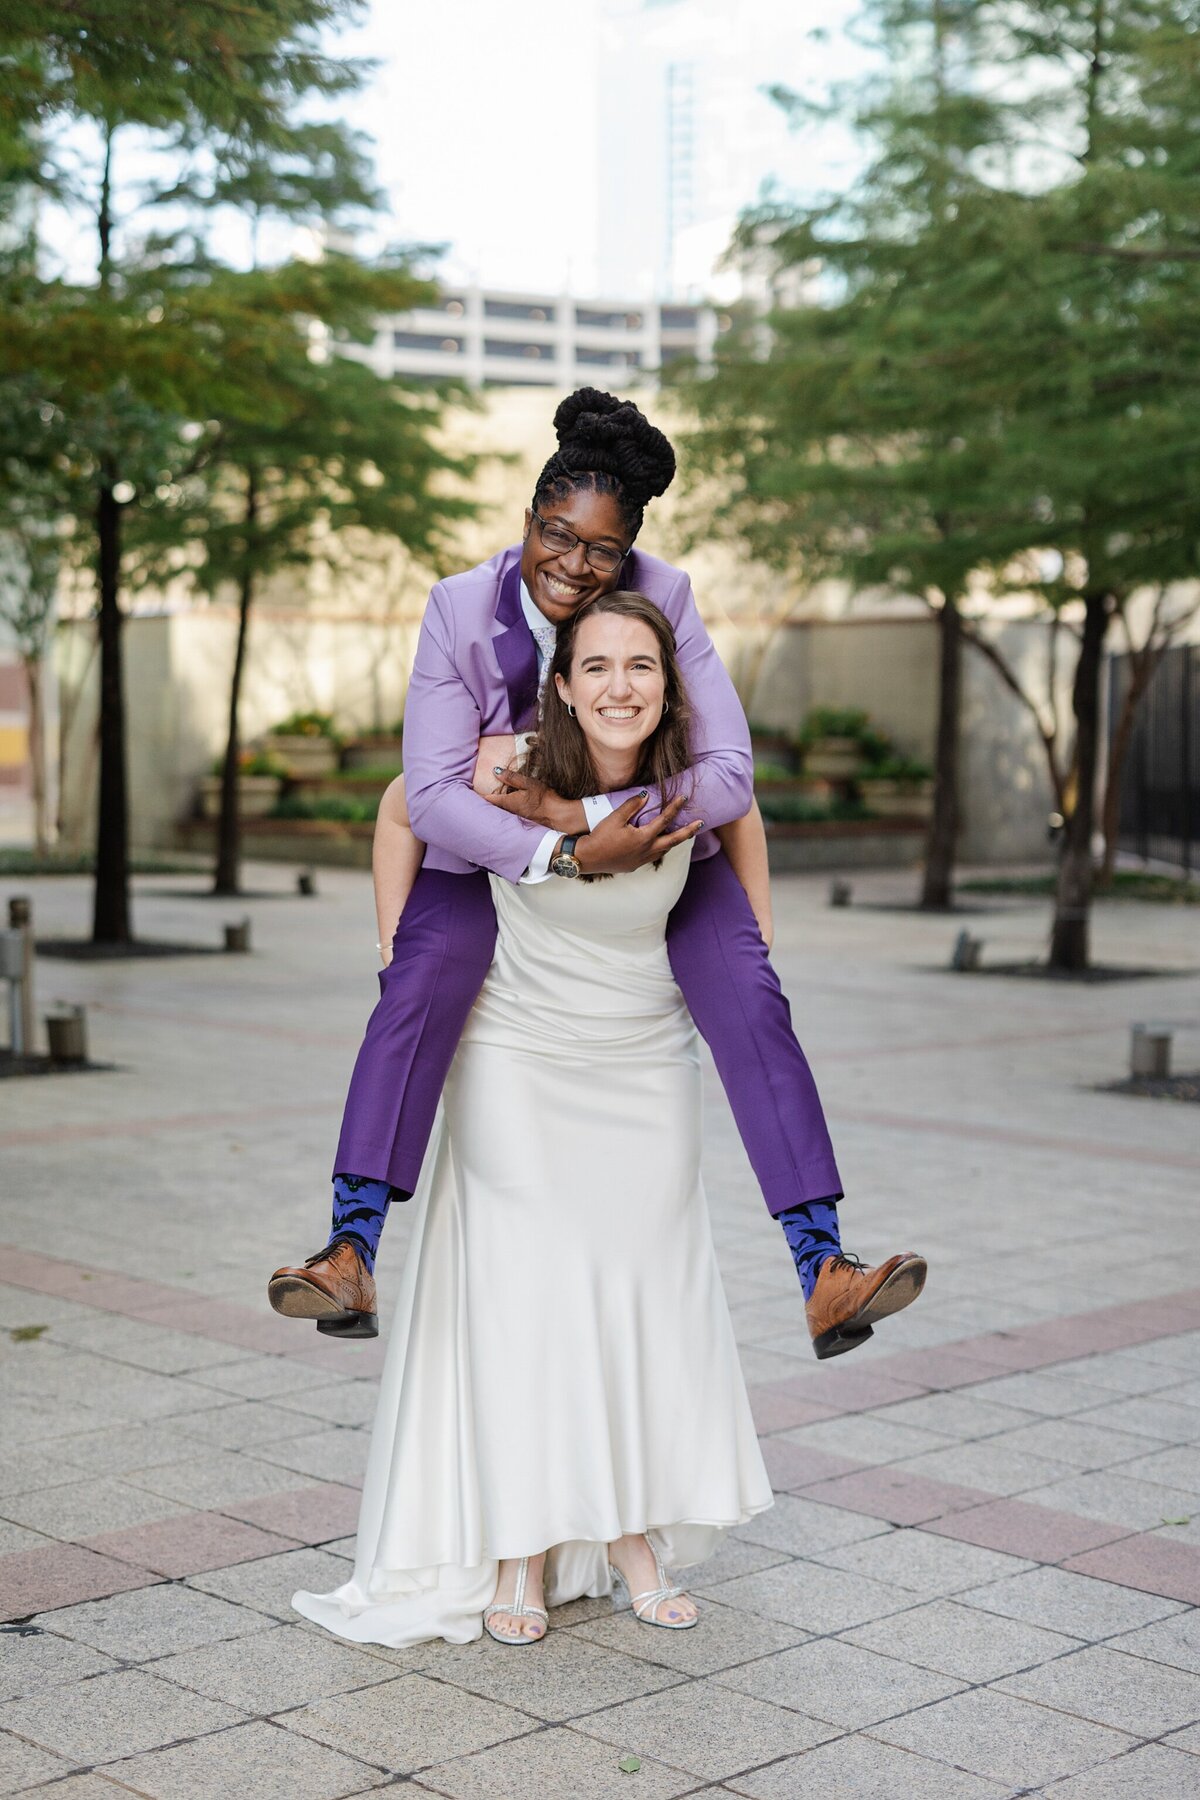 A playful portrait of a two brides on their wedding day at The Westin Dallas Downtown in Dallas, Texas. One bride is riding "piggyback" on the other and both are joyfully smiling at the camera. The bride on the bottom is wearing an elegant white dress and heels while the bride being held up is wearing a purple suit with brown dress shoes.